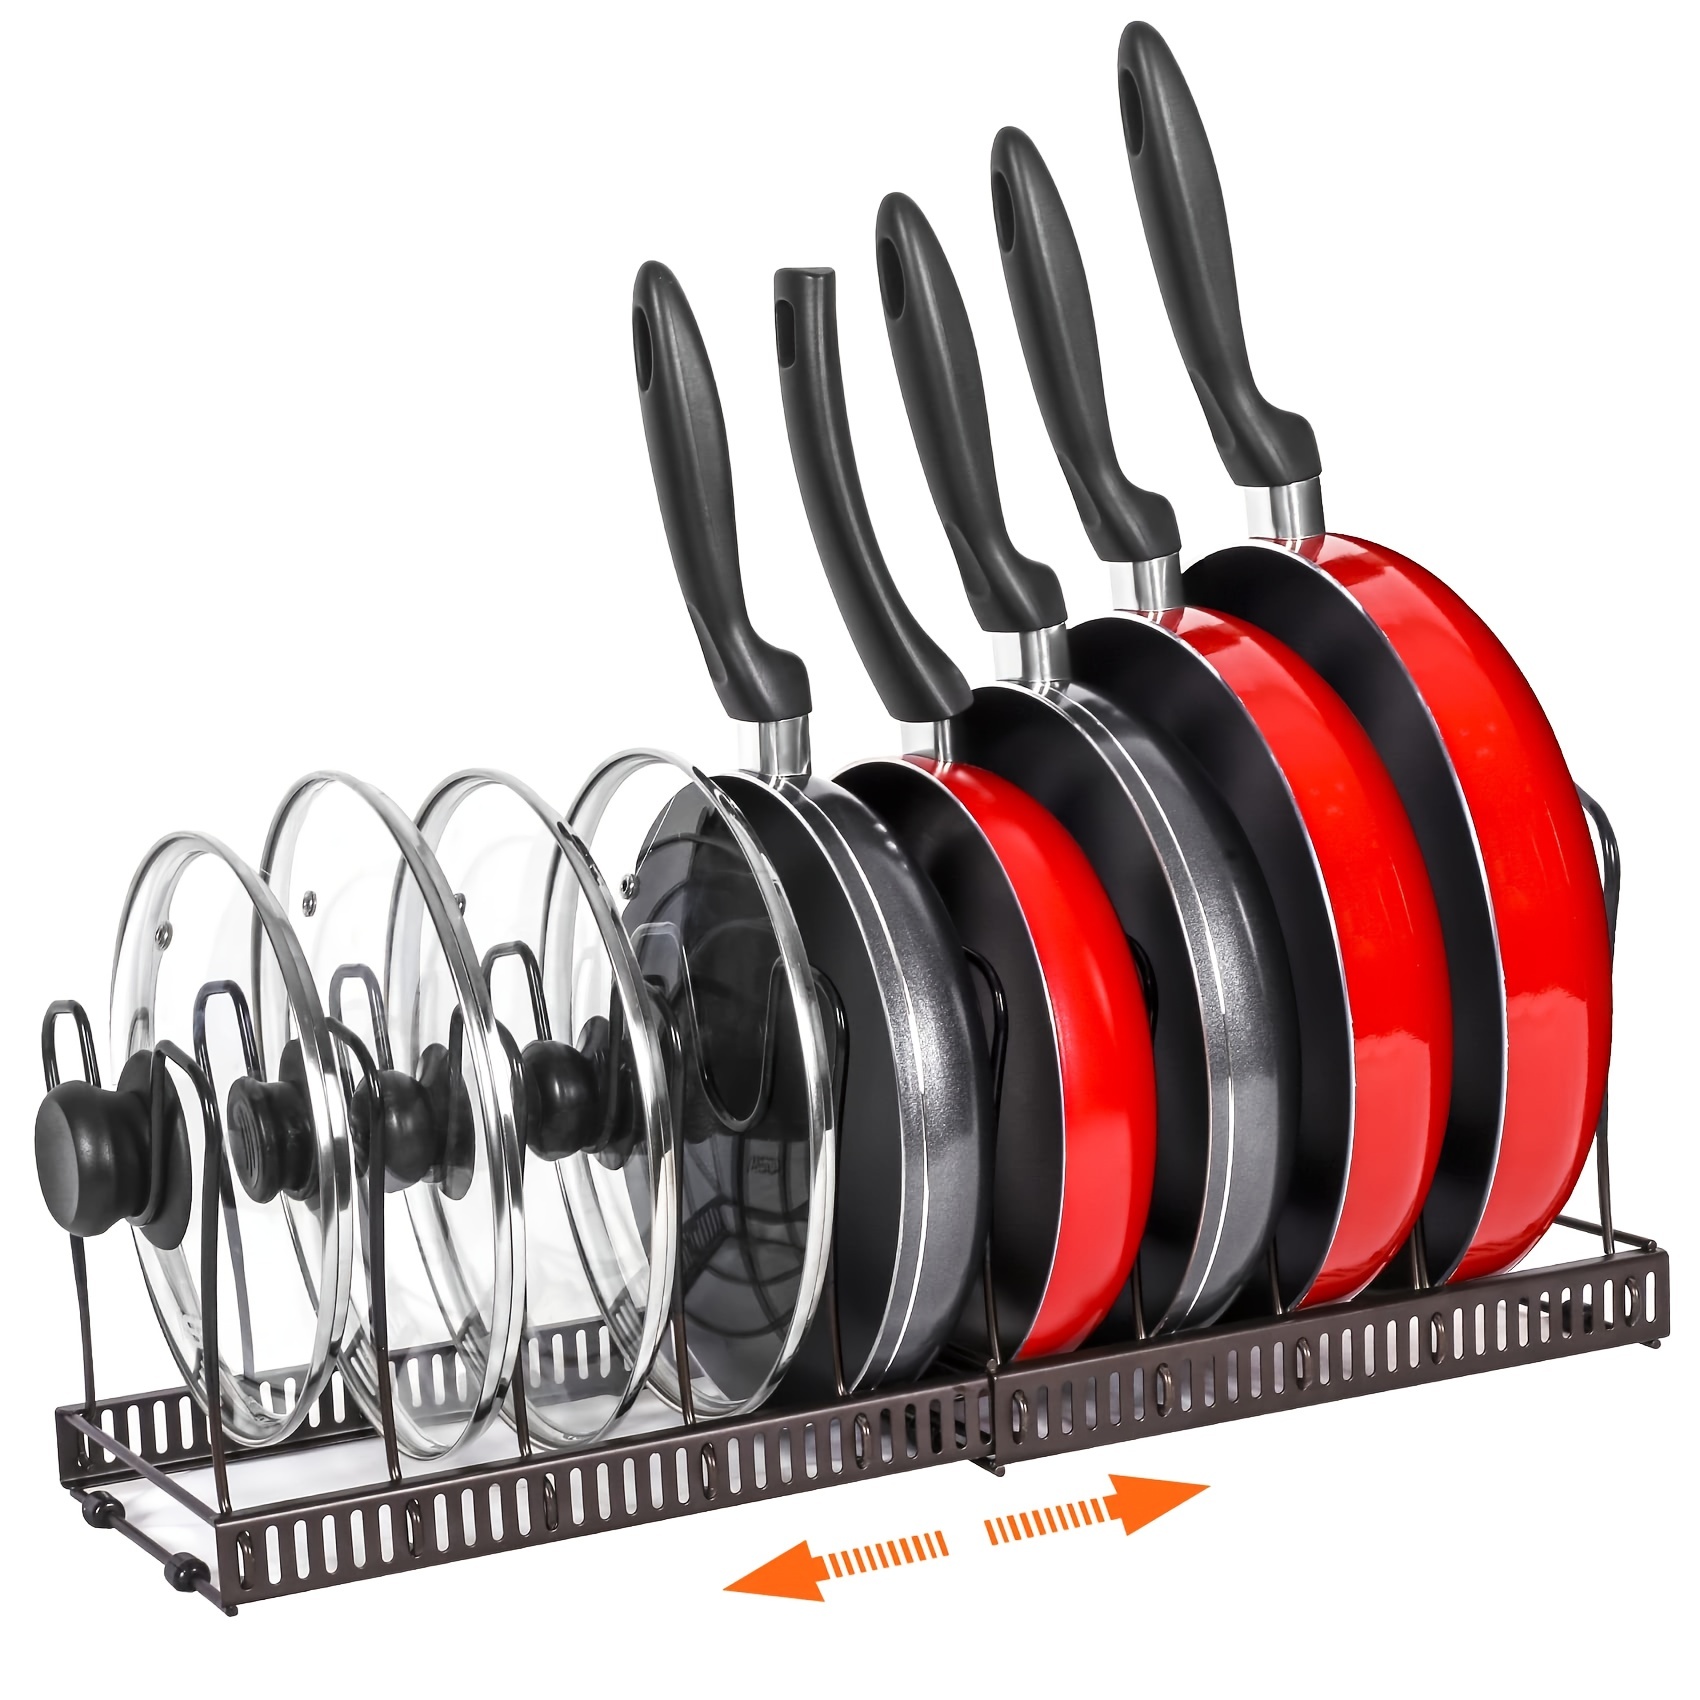 

1 Set Pot Rack, 10 Adjustable Dividers Pots And Pans Organizers, Expandable Pots Lid Holder, Kitchen Cabinet Pantry Bakeware Organizer And Storage, Kitchen Accessories